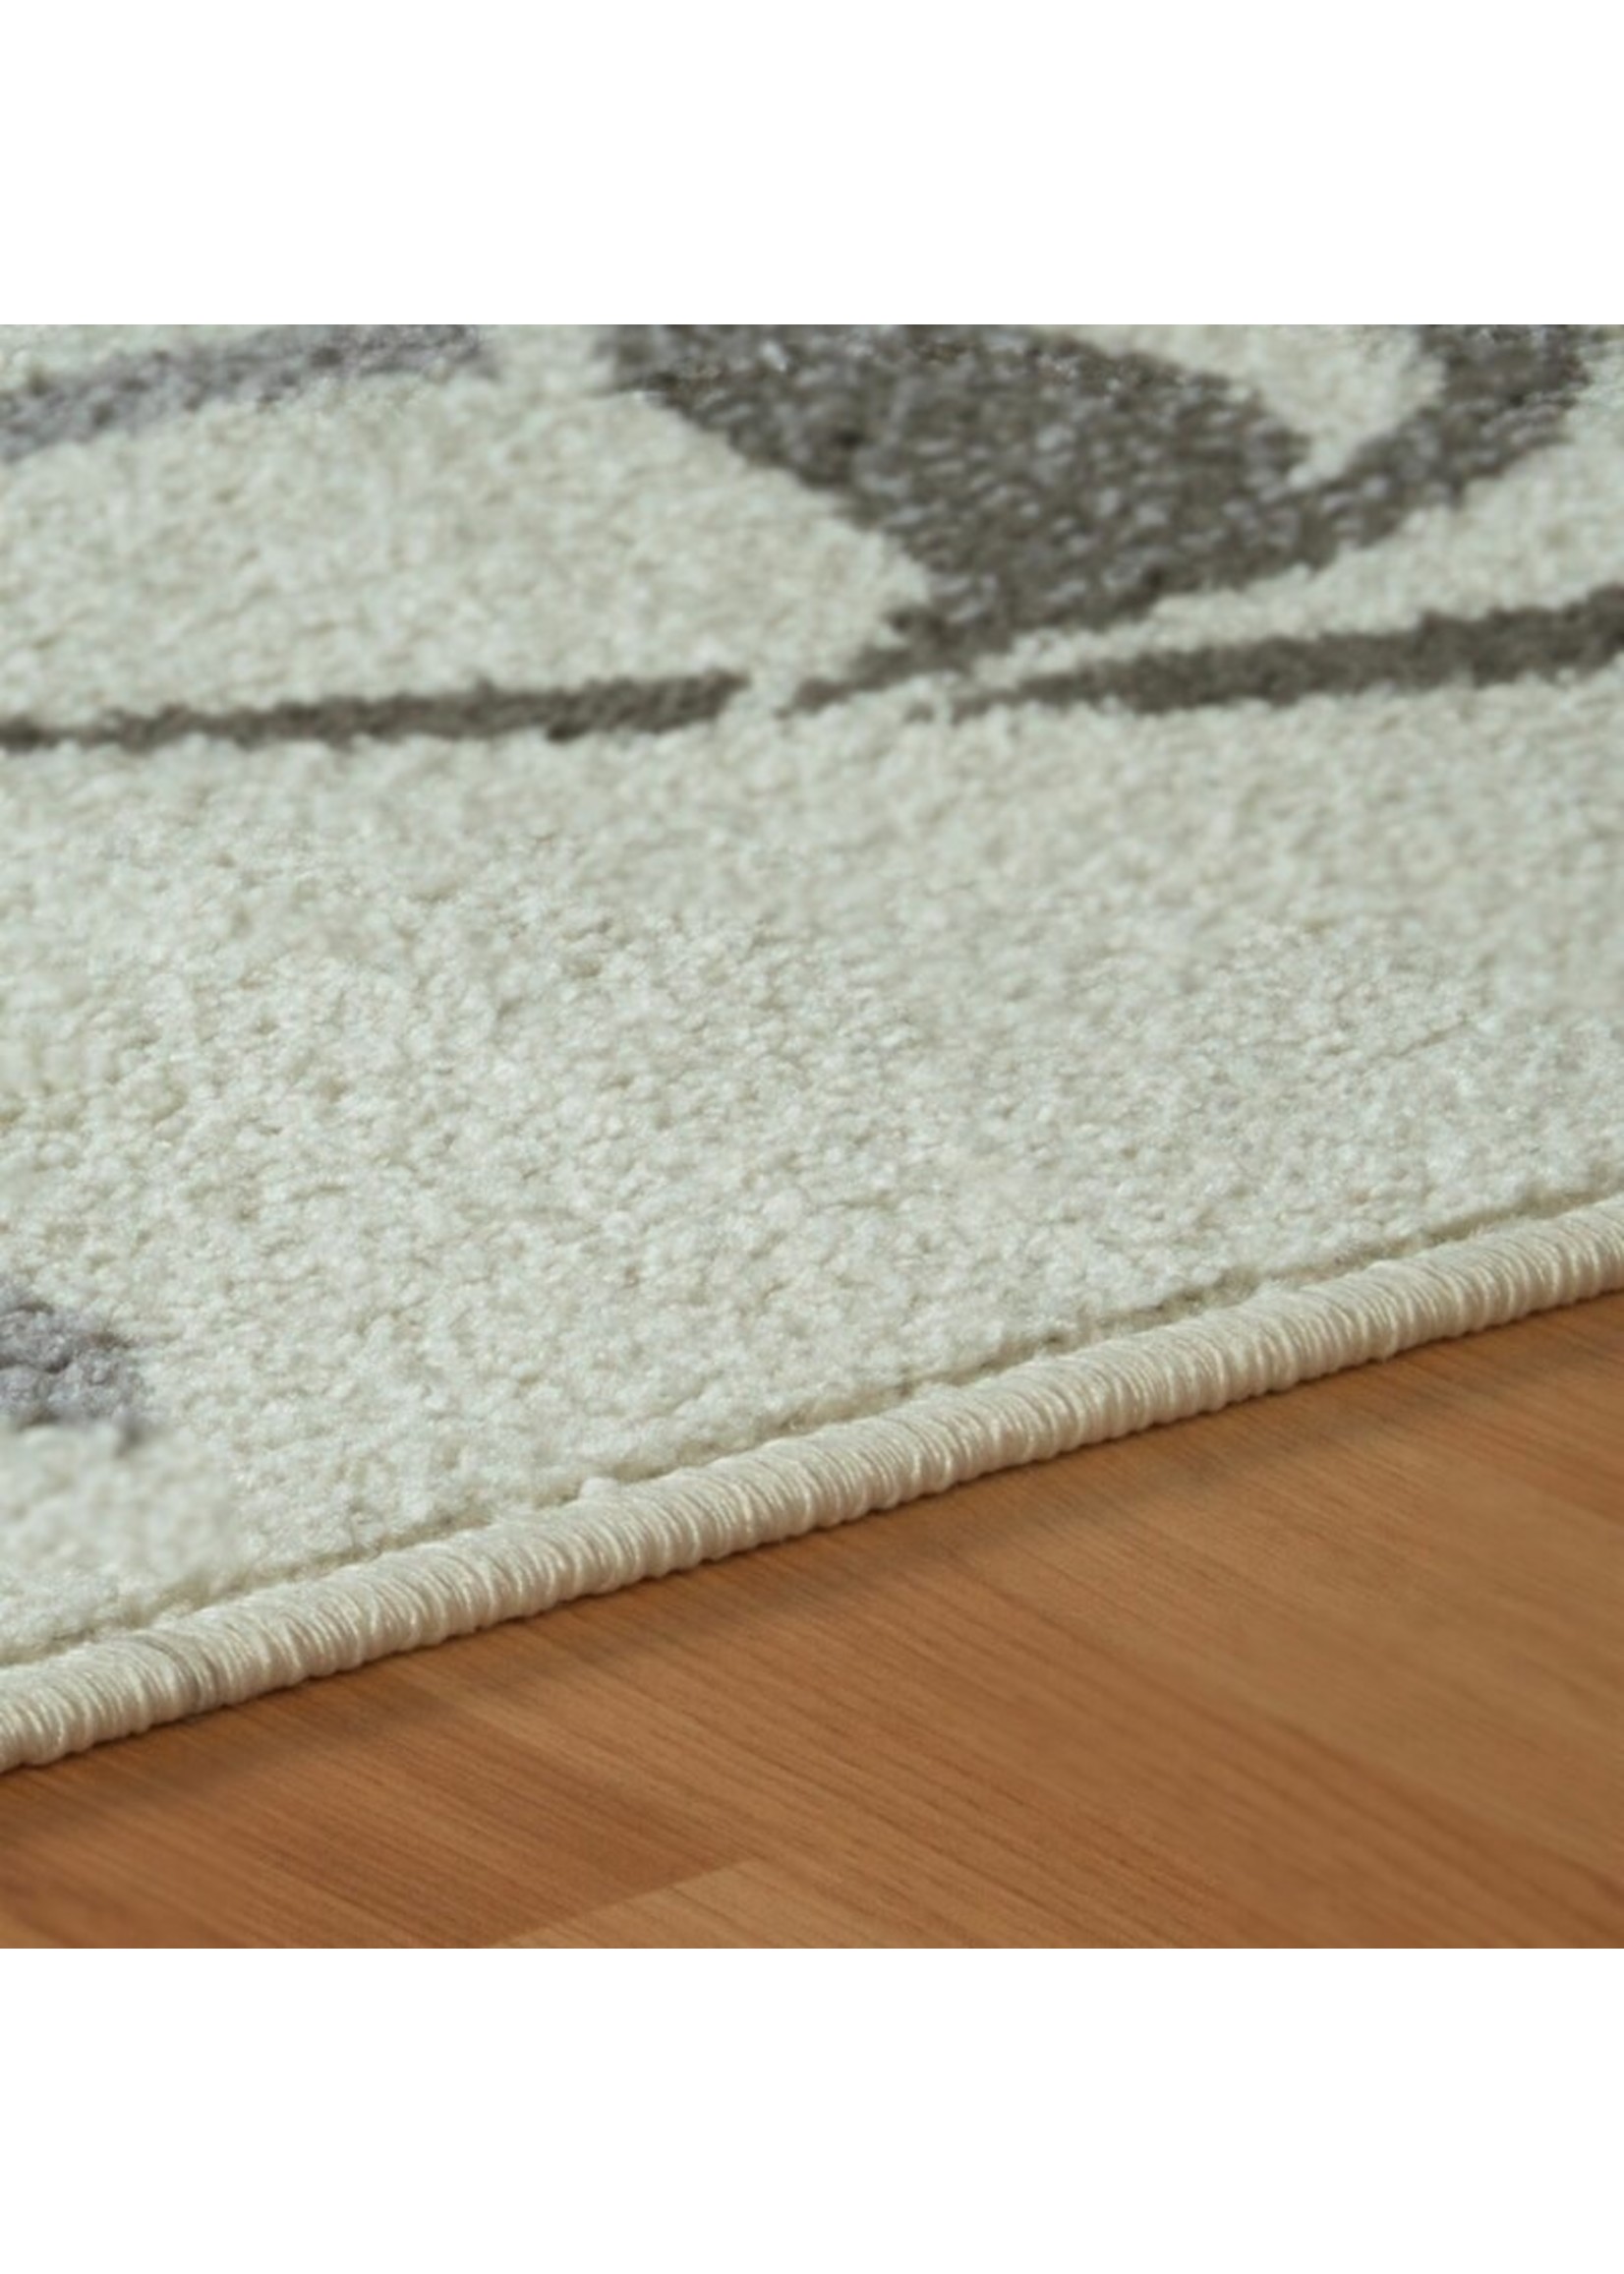 *4' x 6' - Breese Floral Ivory/Gray Area Rug